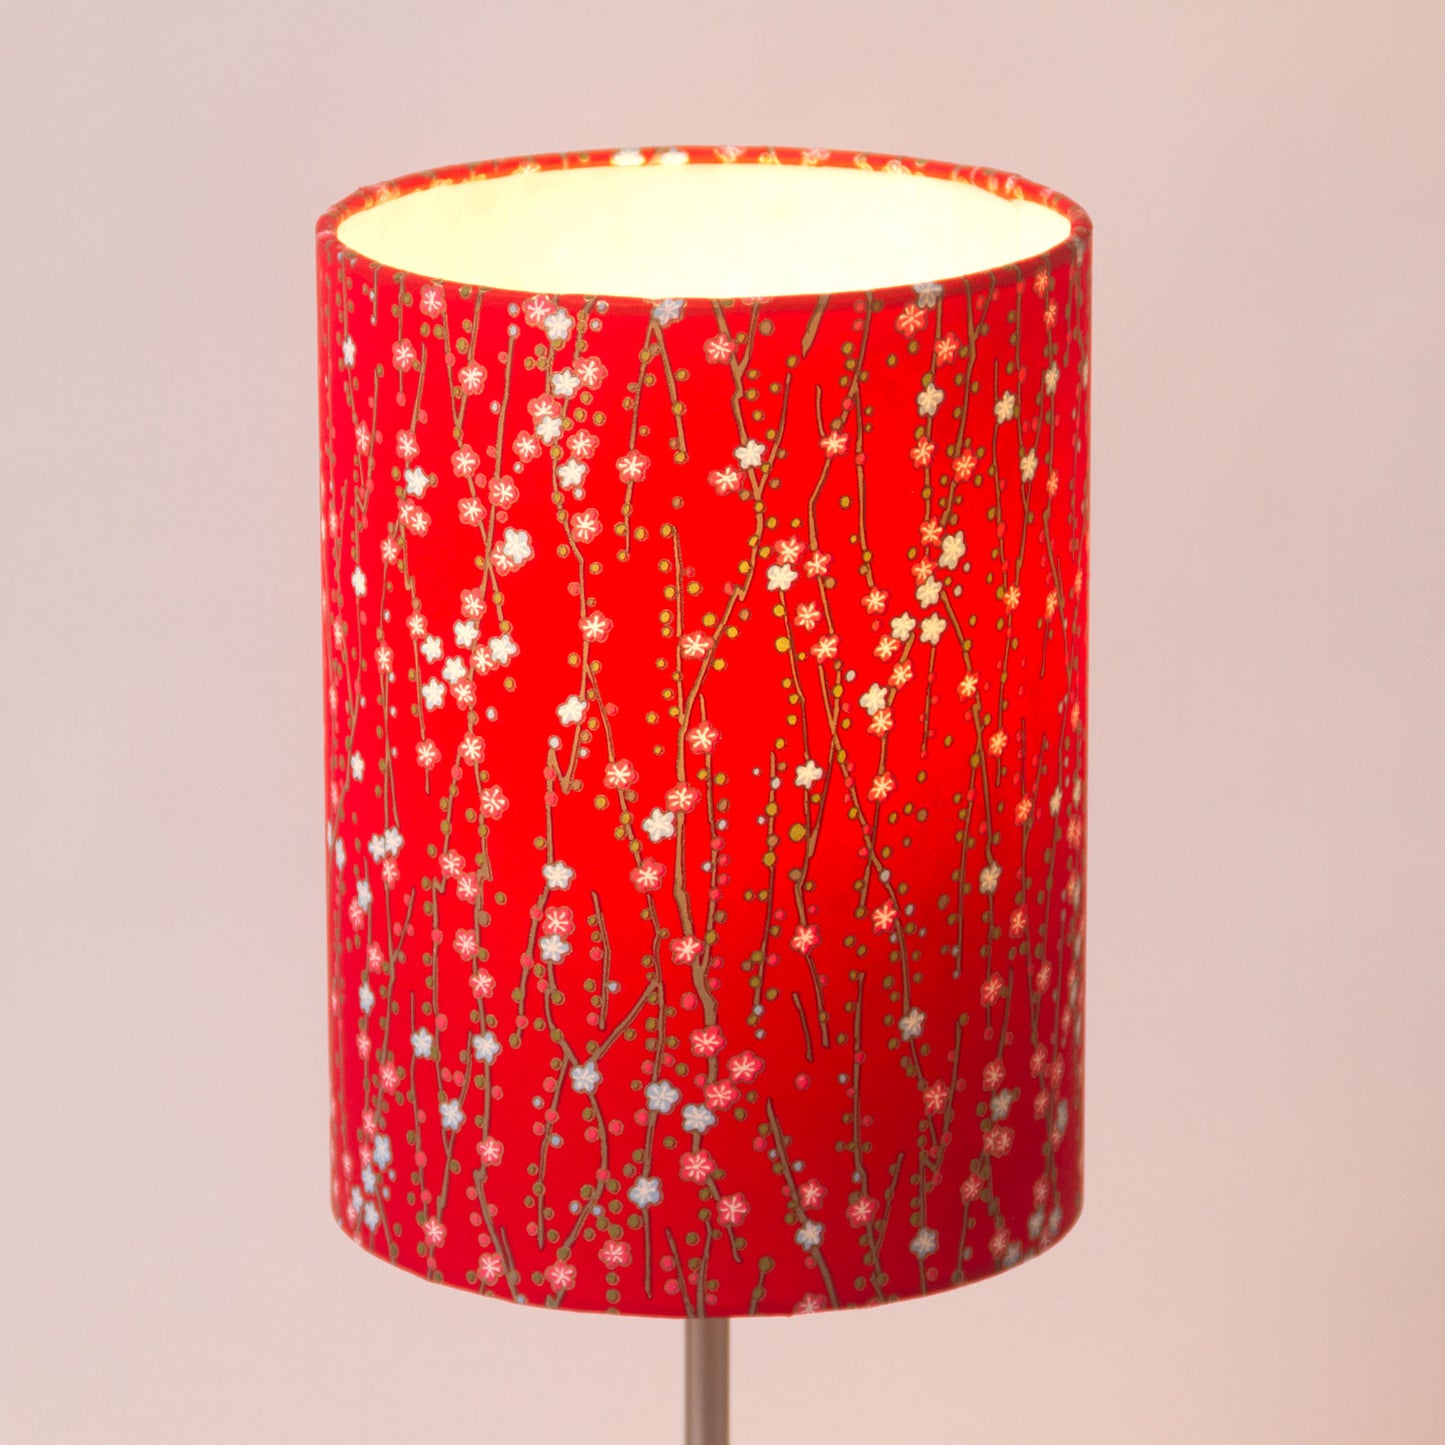 Free Standing Table Lamp Large - W01 ~ Red Daisies